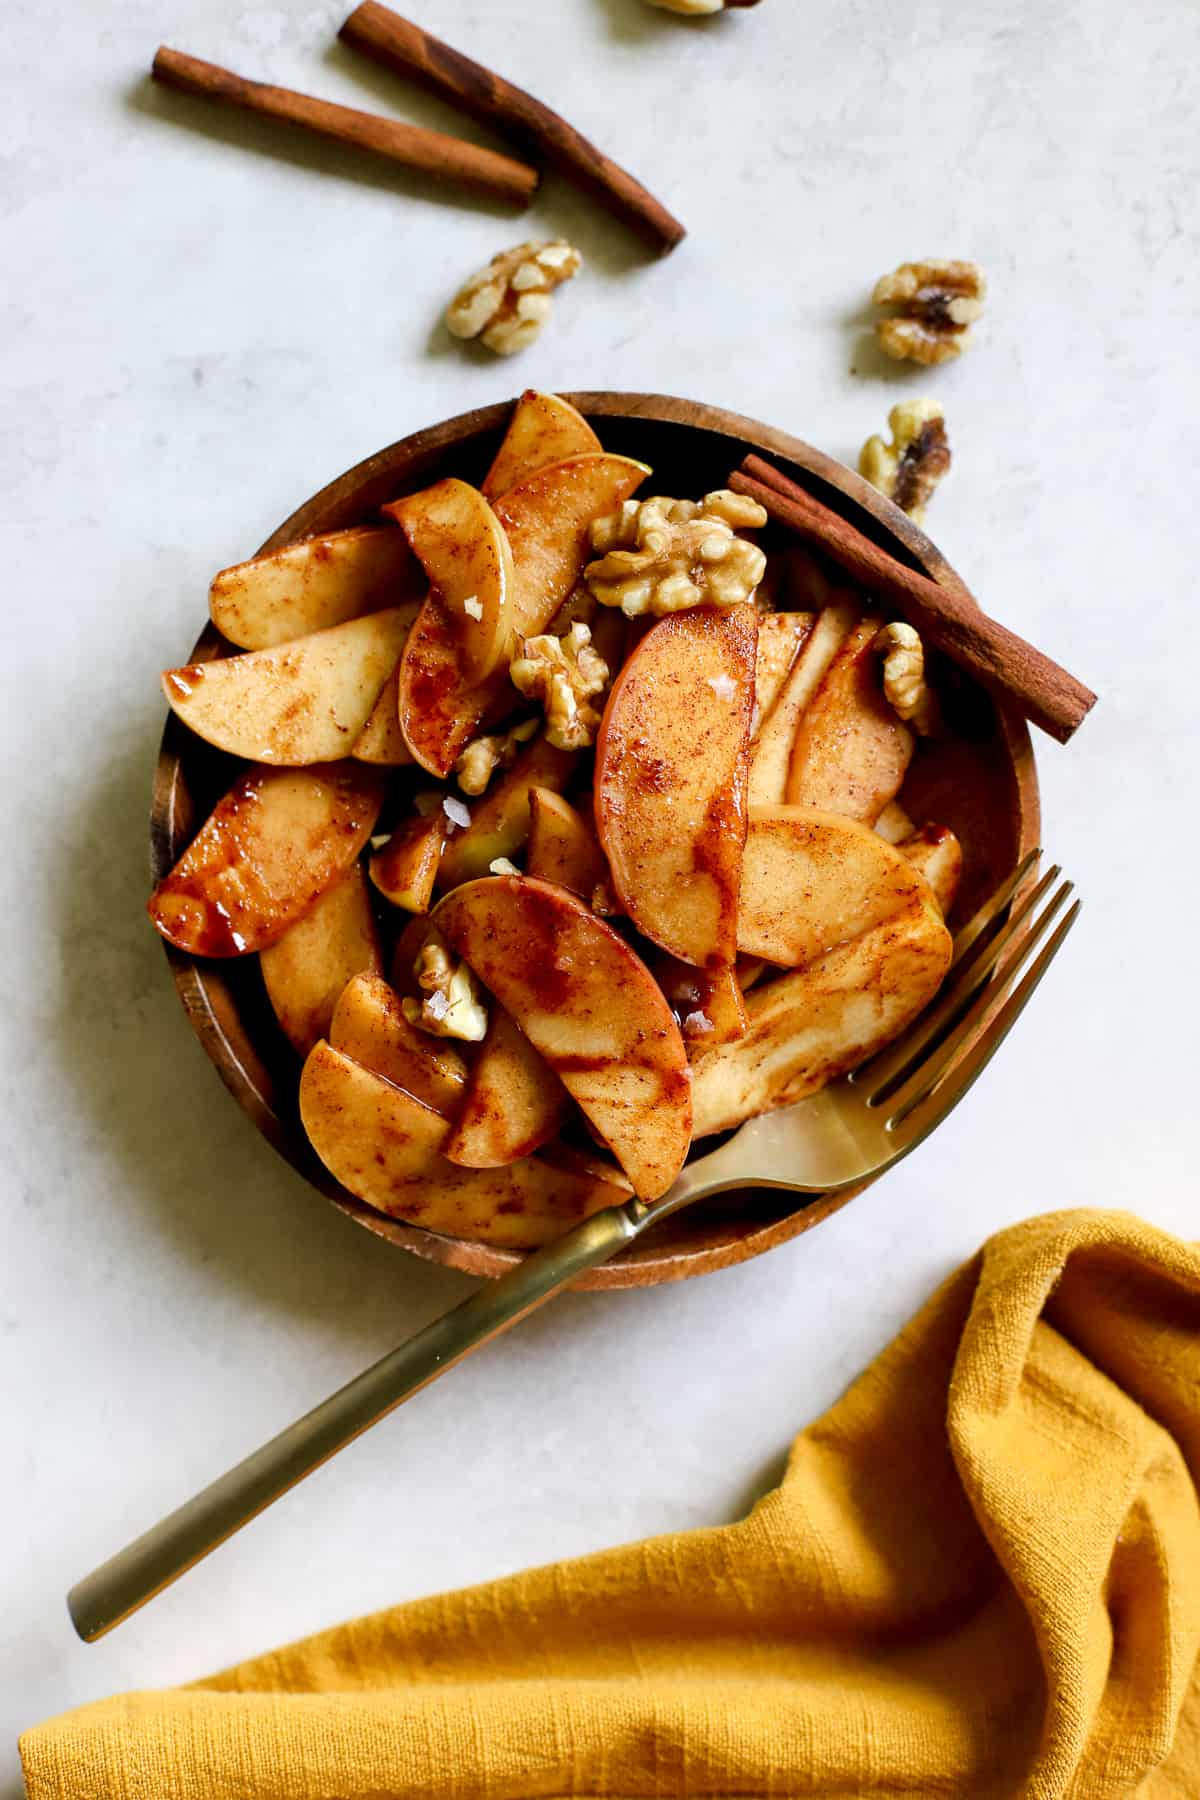 Simple sautéed apples on small wooden plate, topped with walnuts and flaky salt, with a golden fork on gray/white surface with golden yellow linen and cinnamon sticks on side